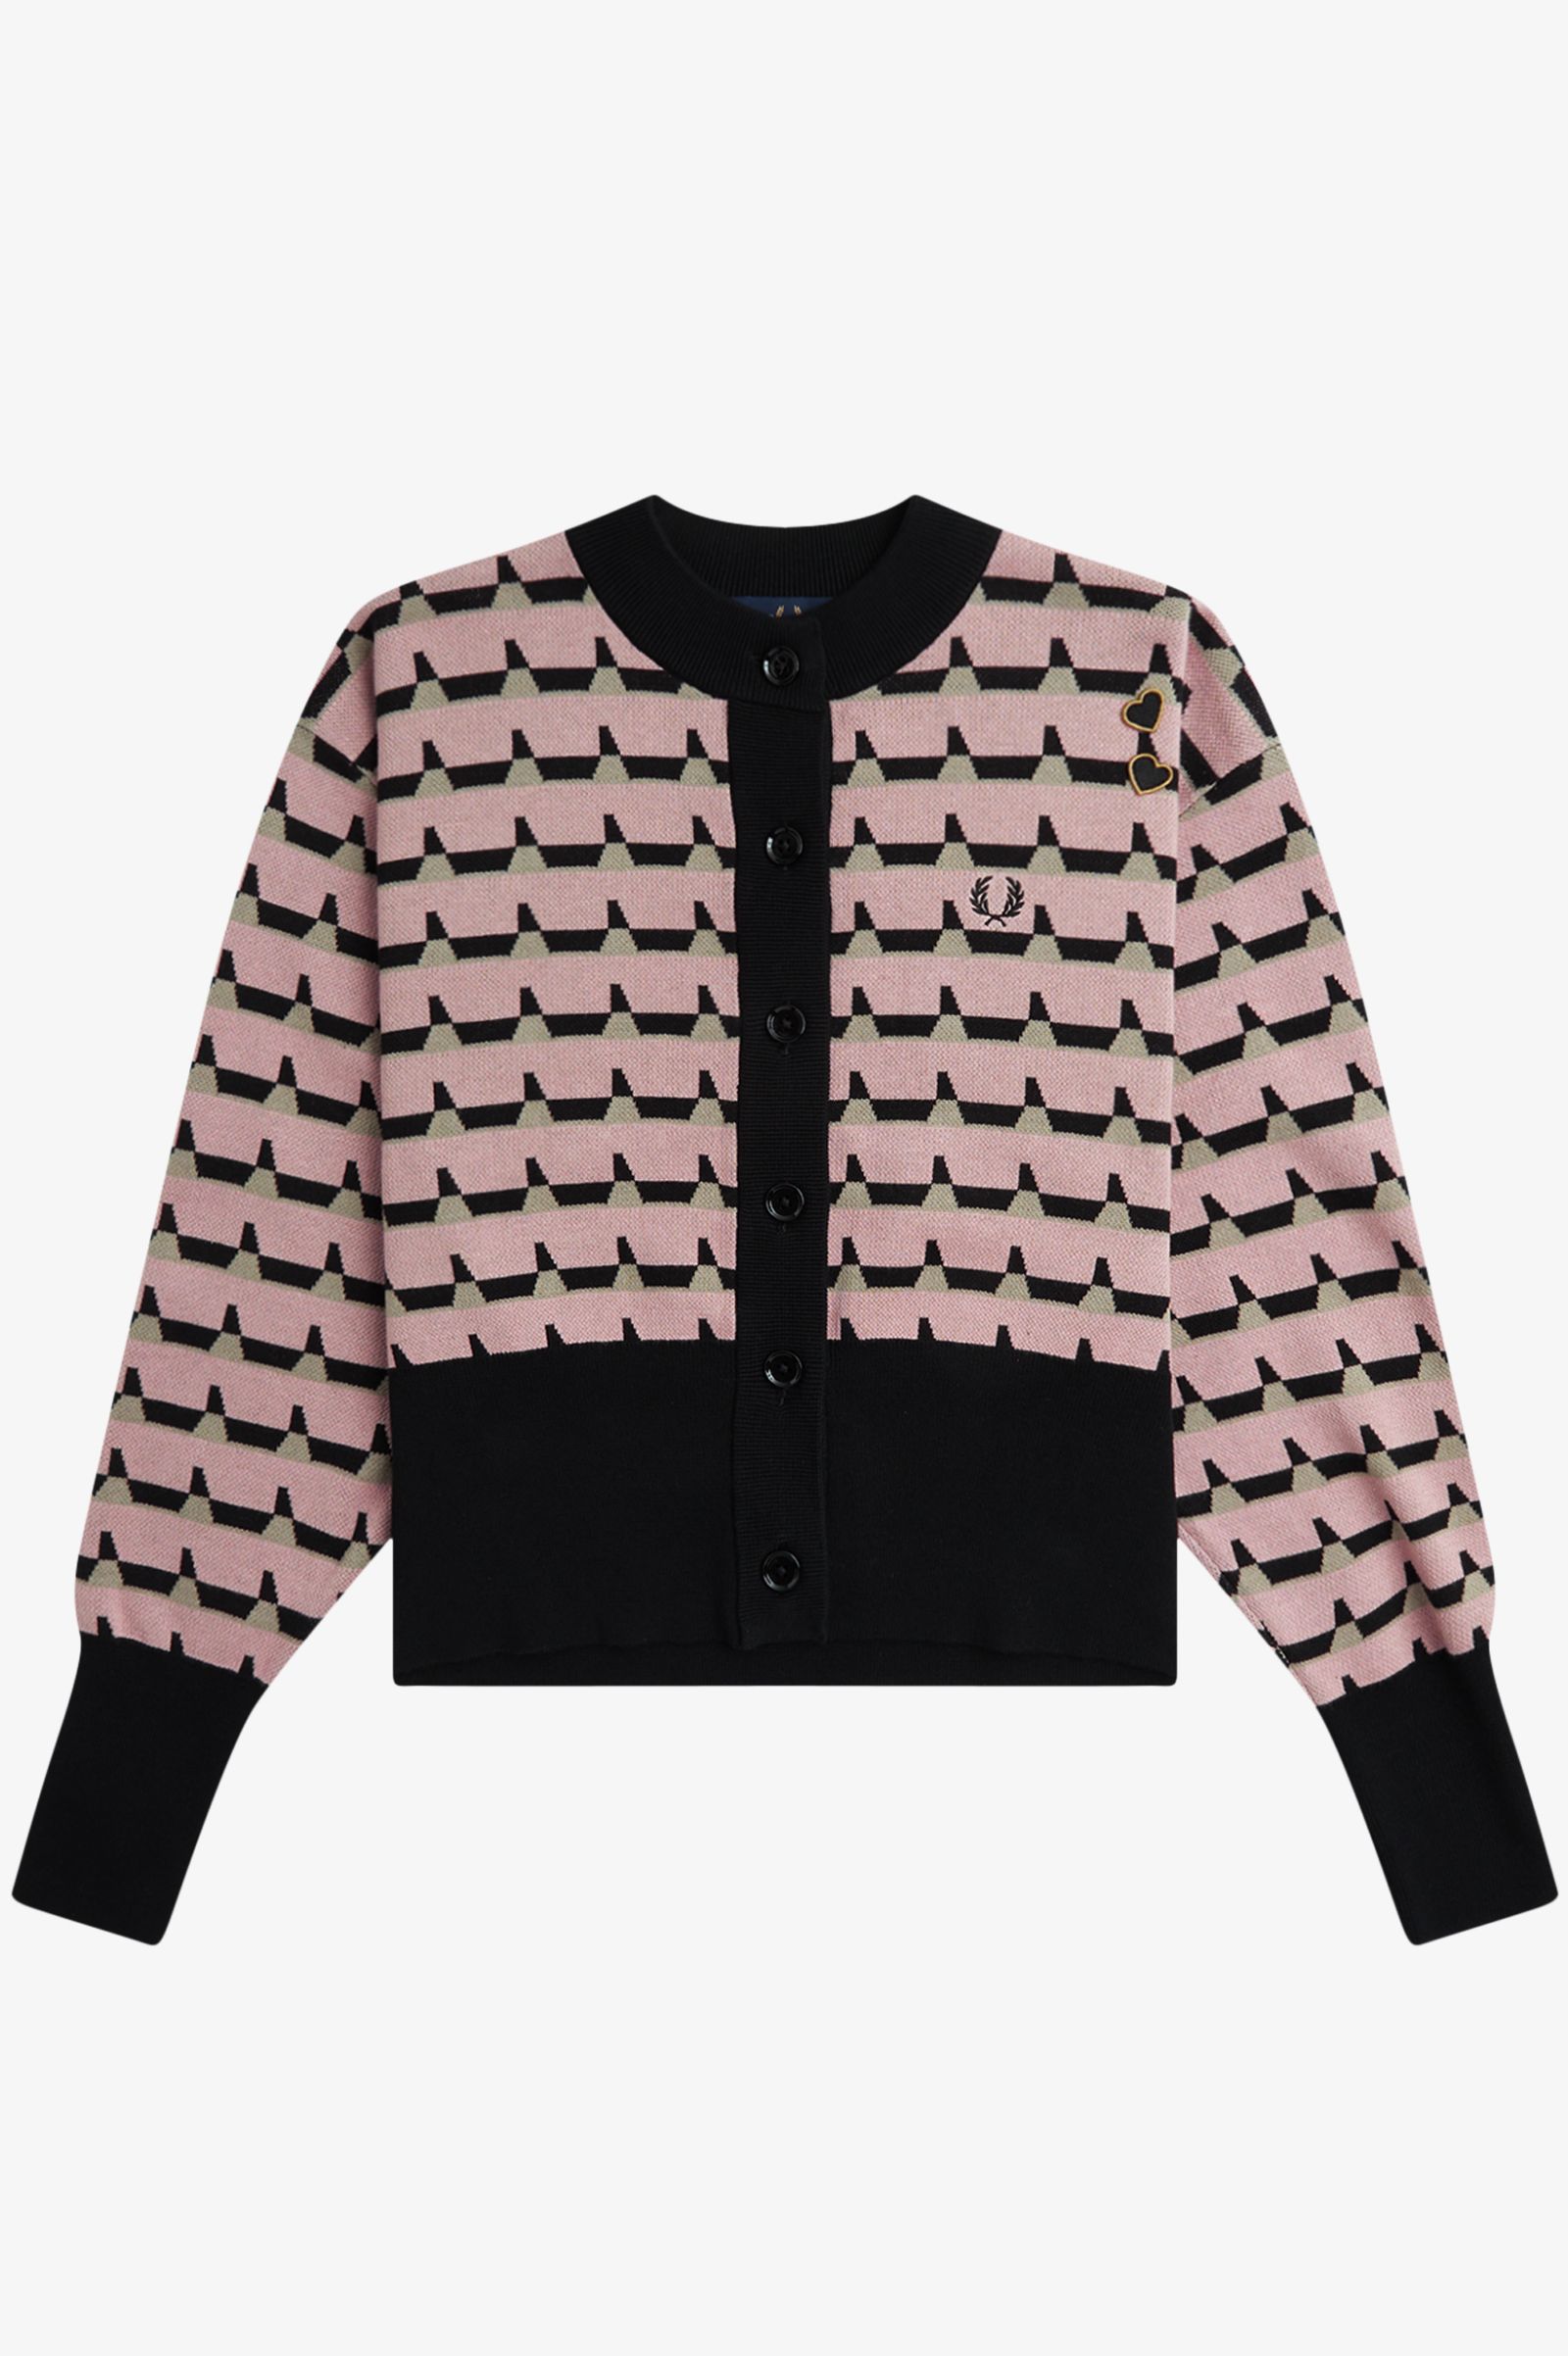 Fred Perry Amy Winehouse Jacquard Knit Cardigan in Dusty Rose Pink